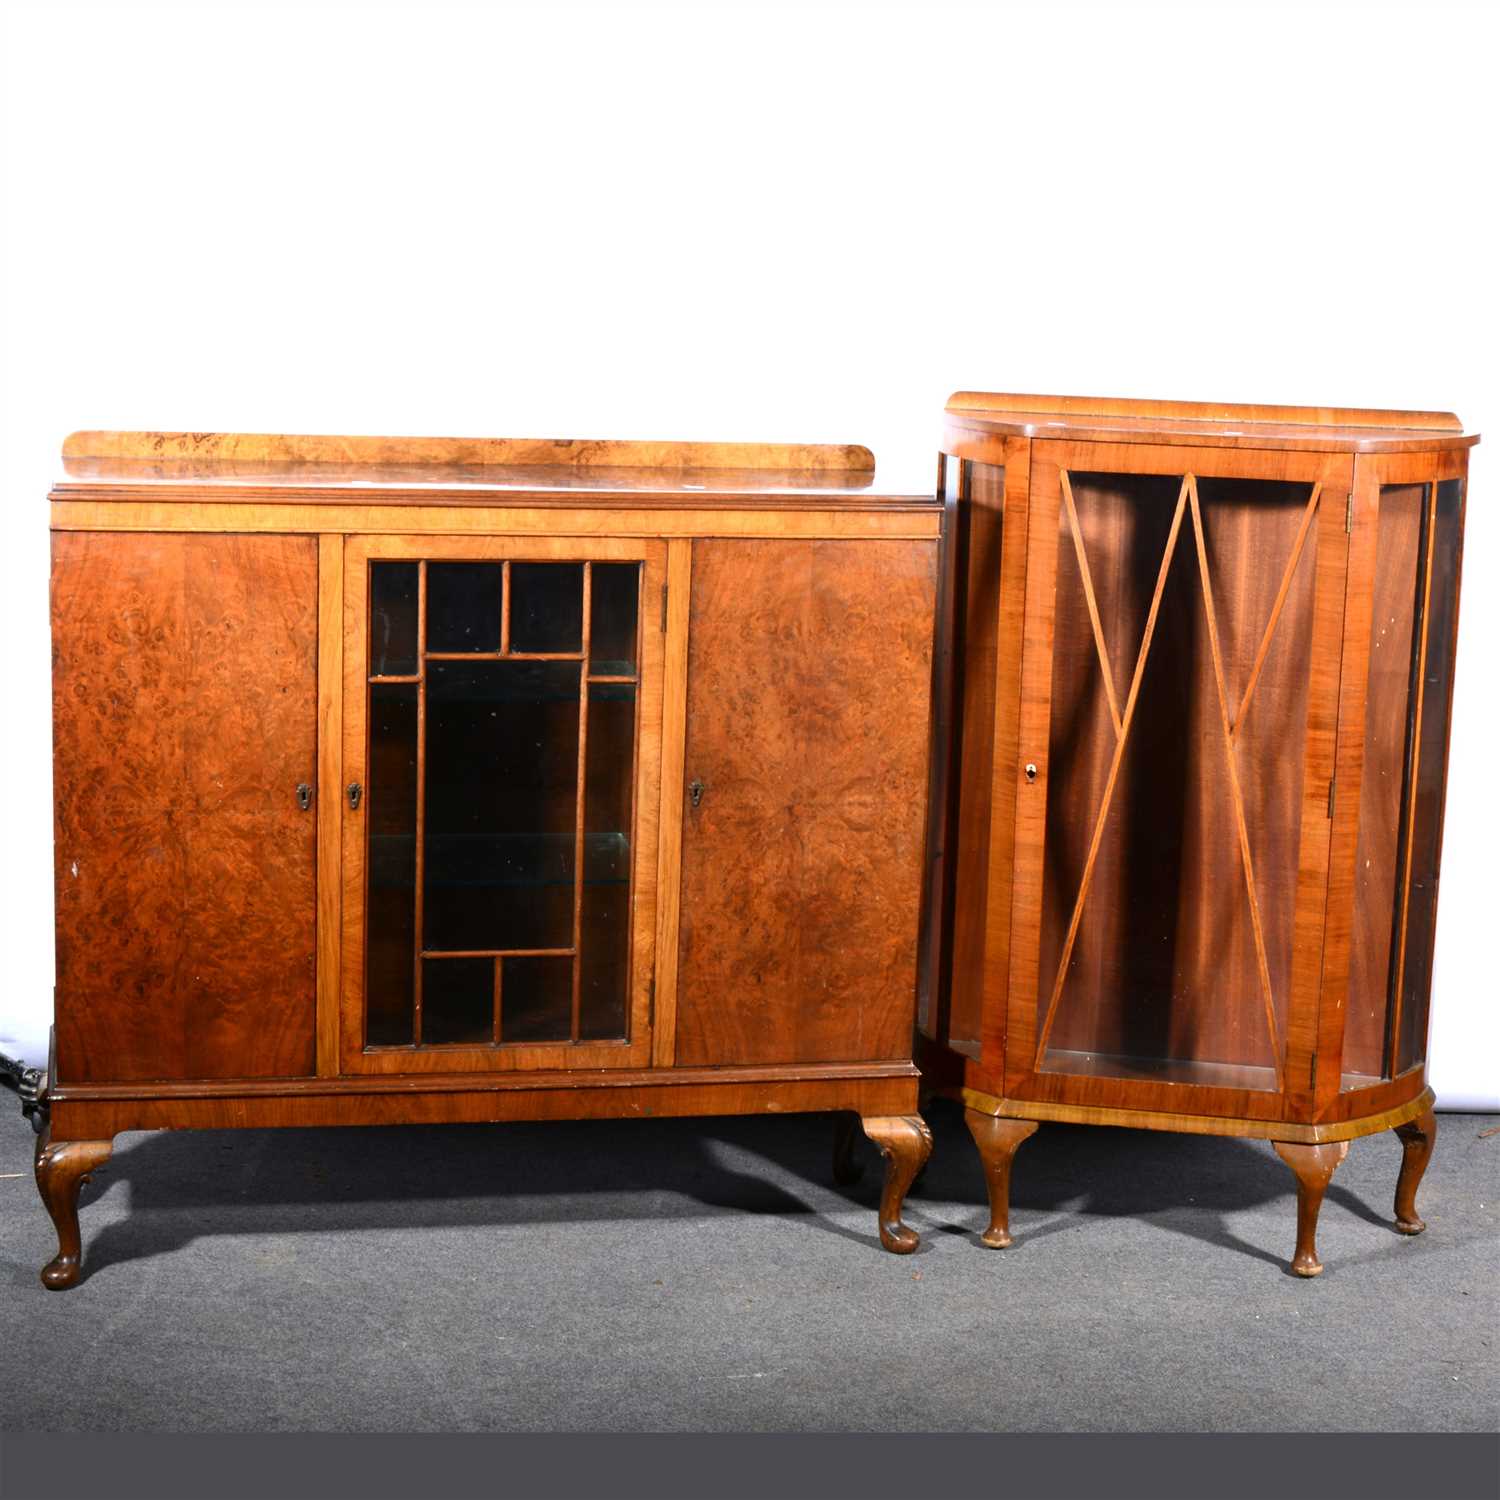 Lot 540 A Walnut Display Cabinet And Another Walnut